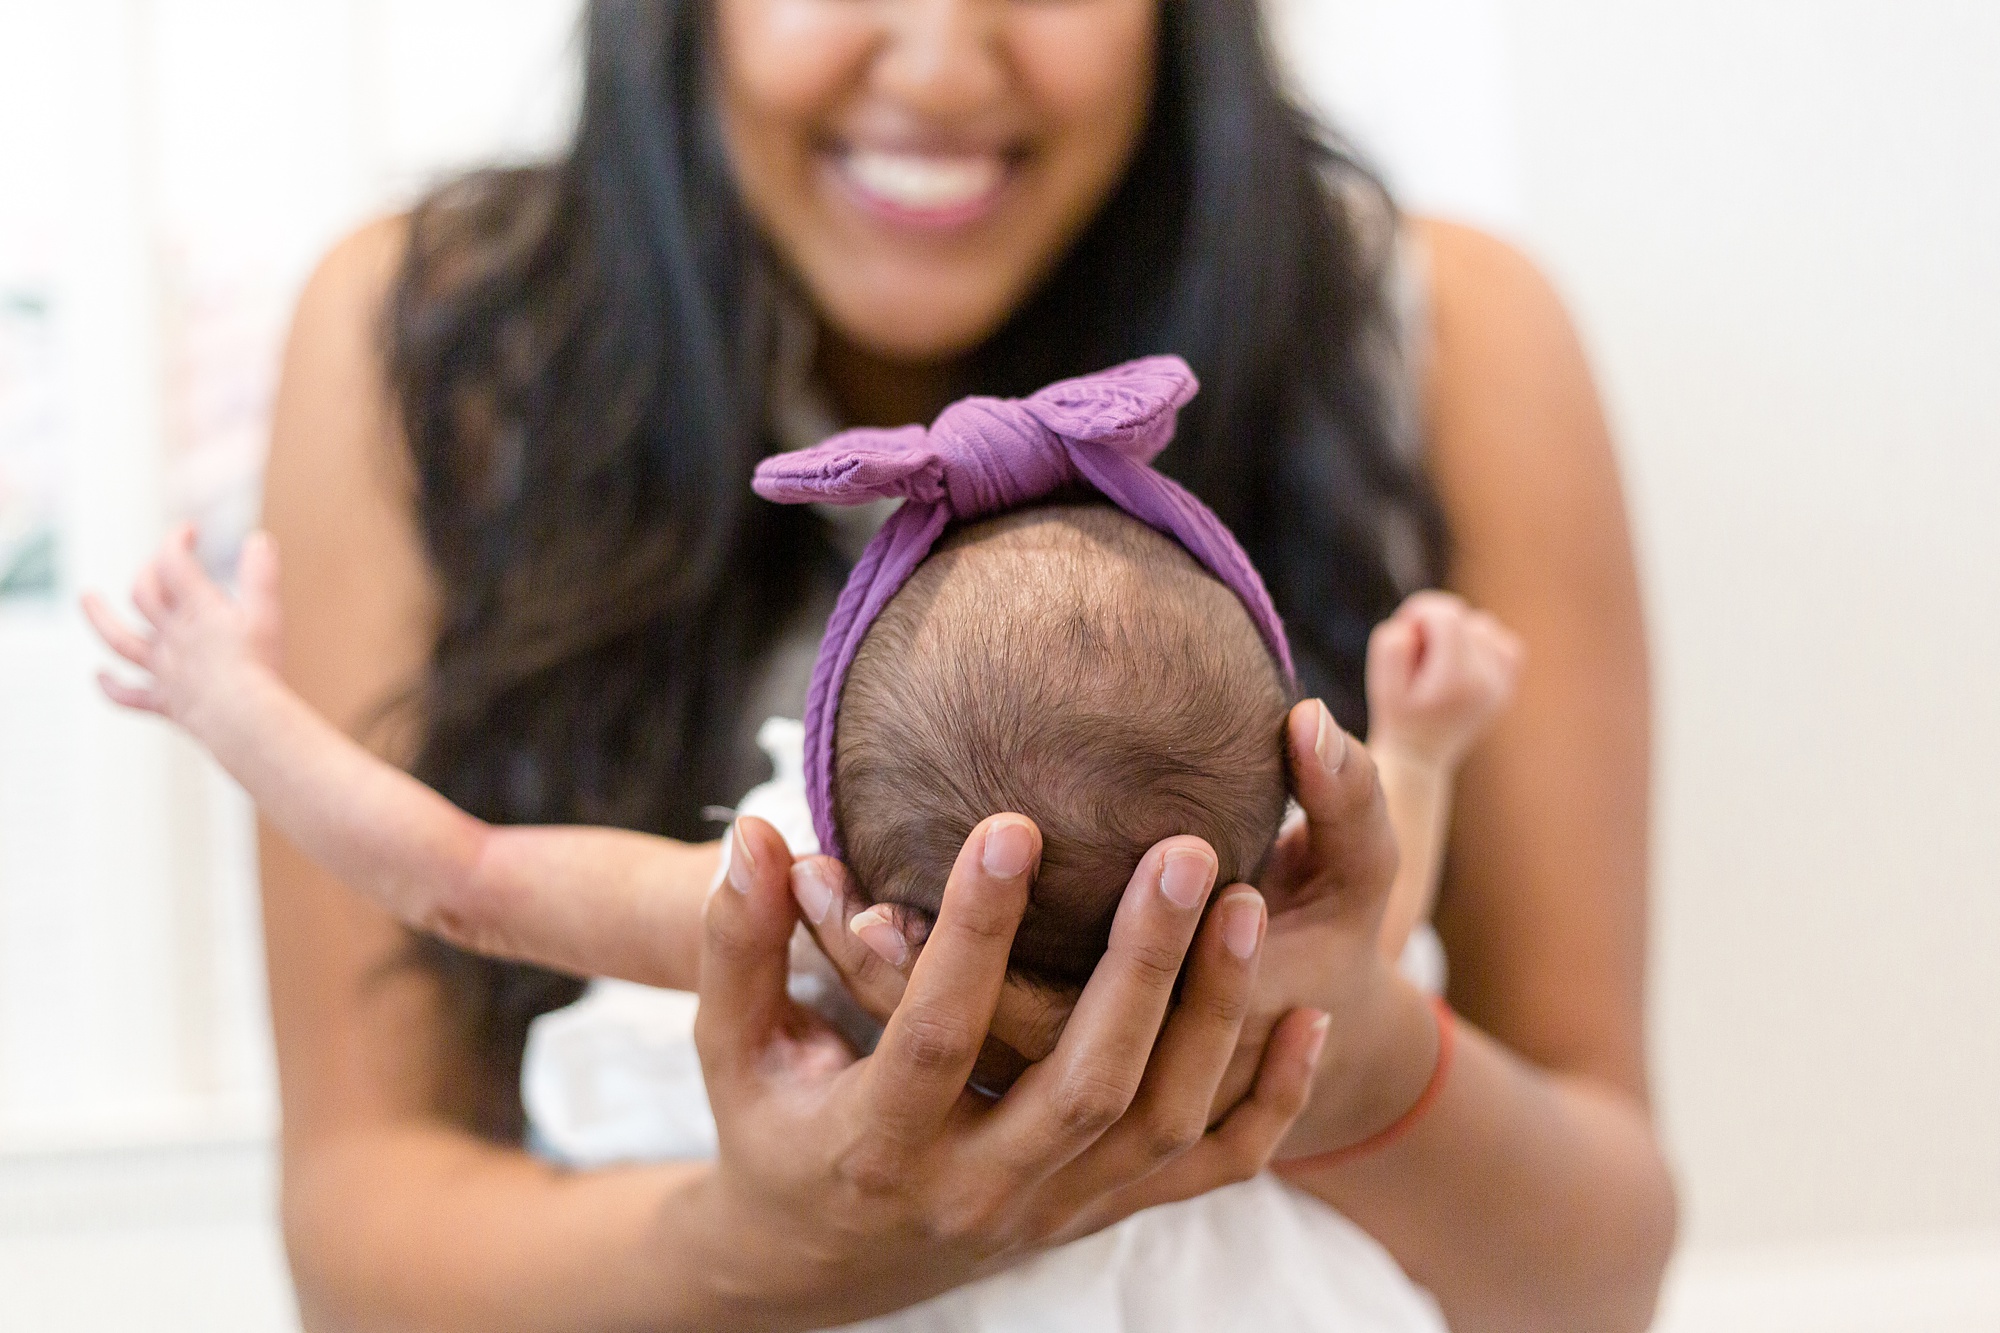 mom holds baby girl in purple bow by crib